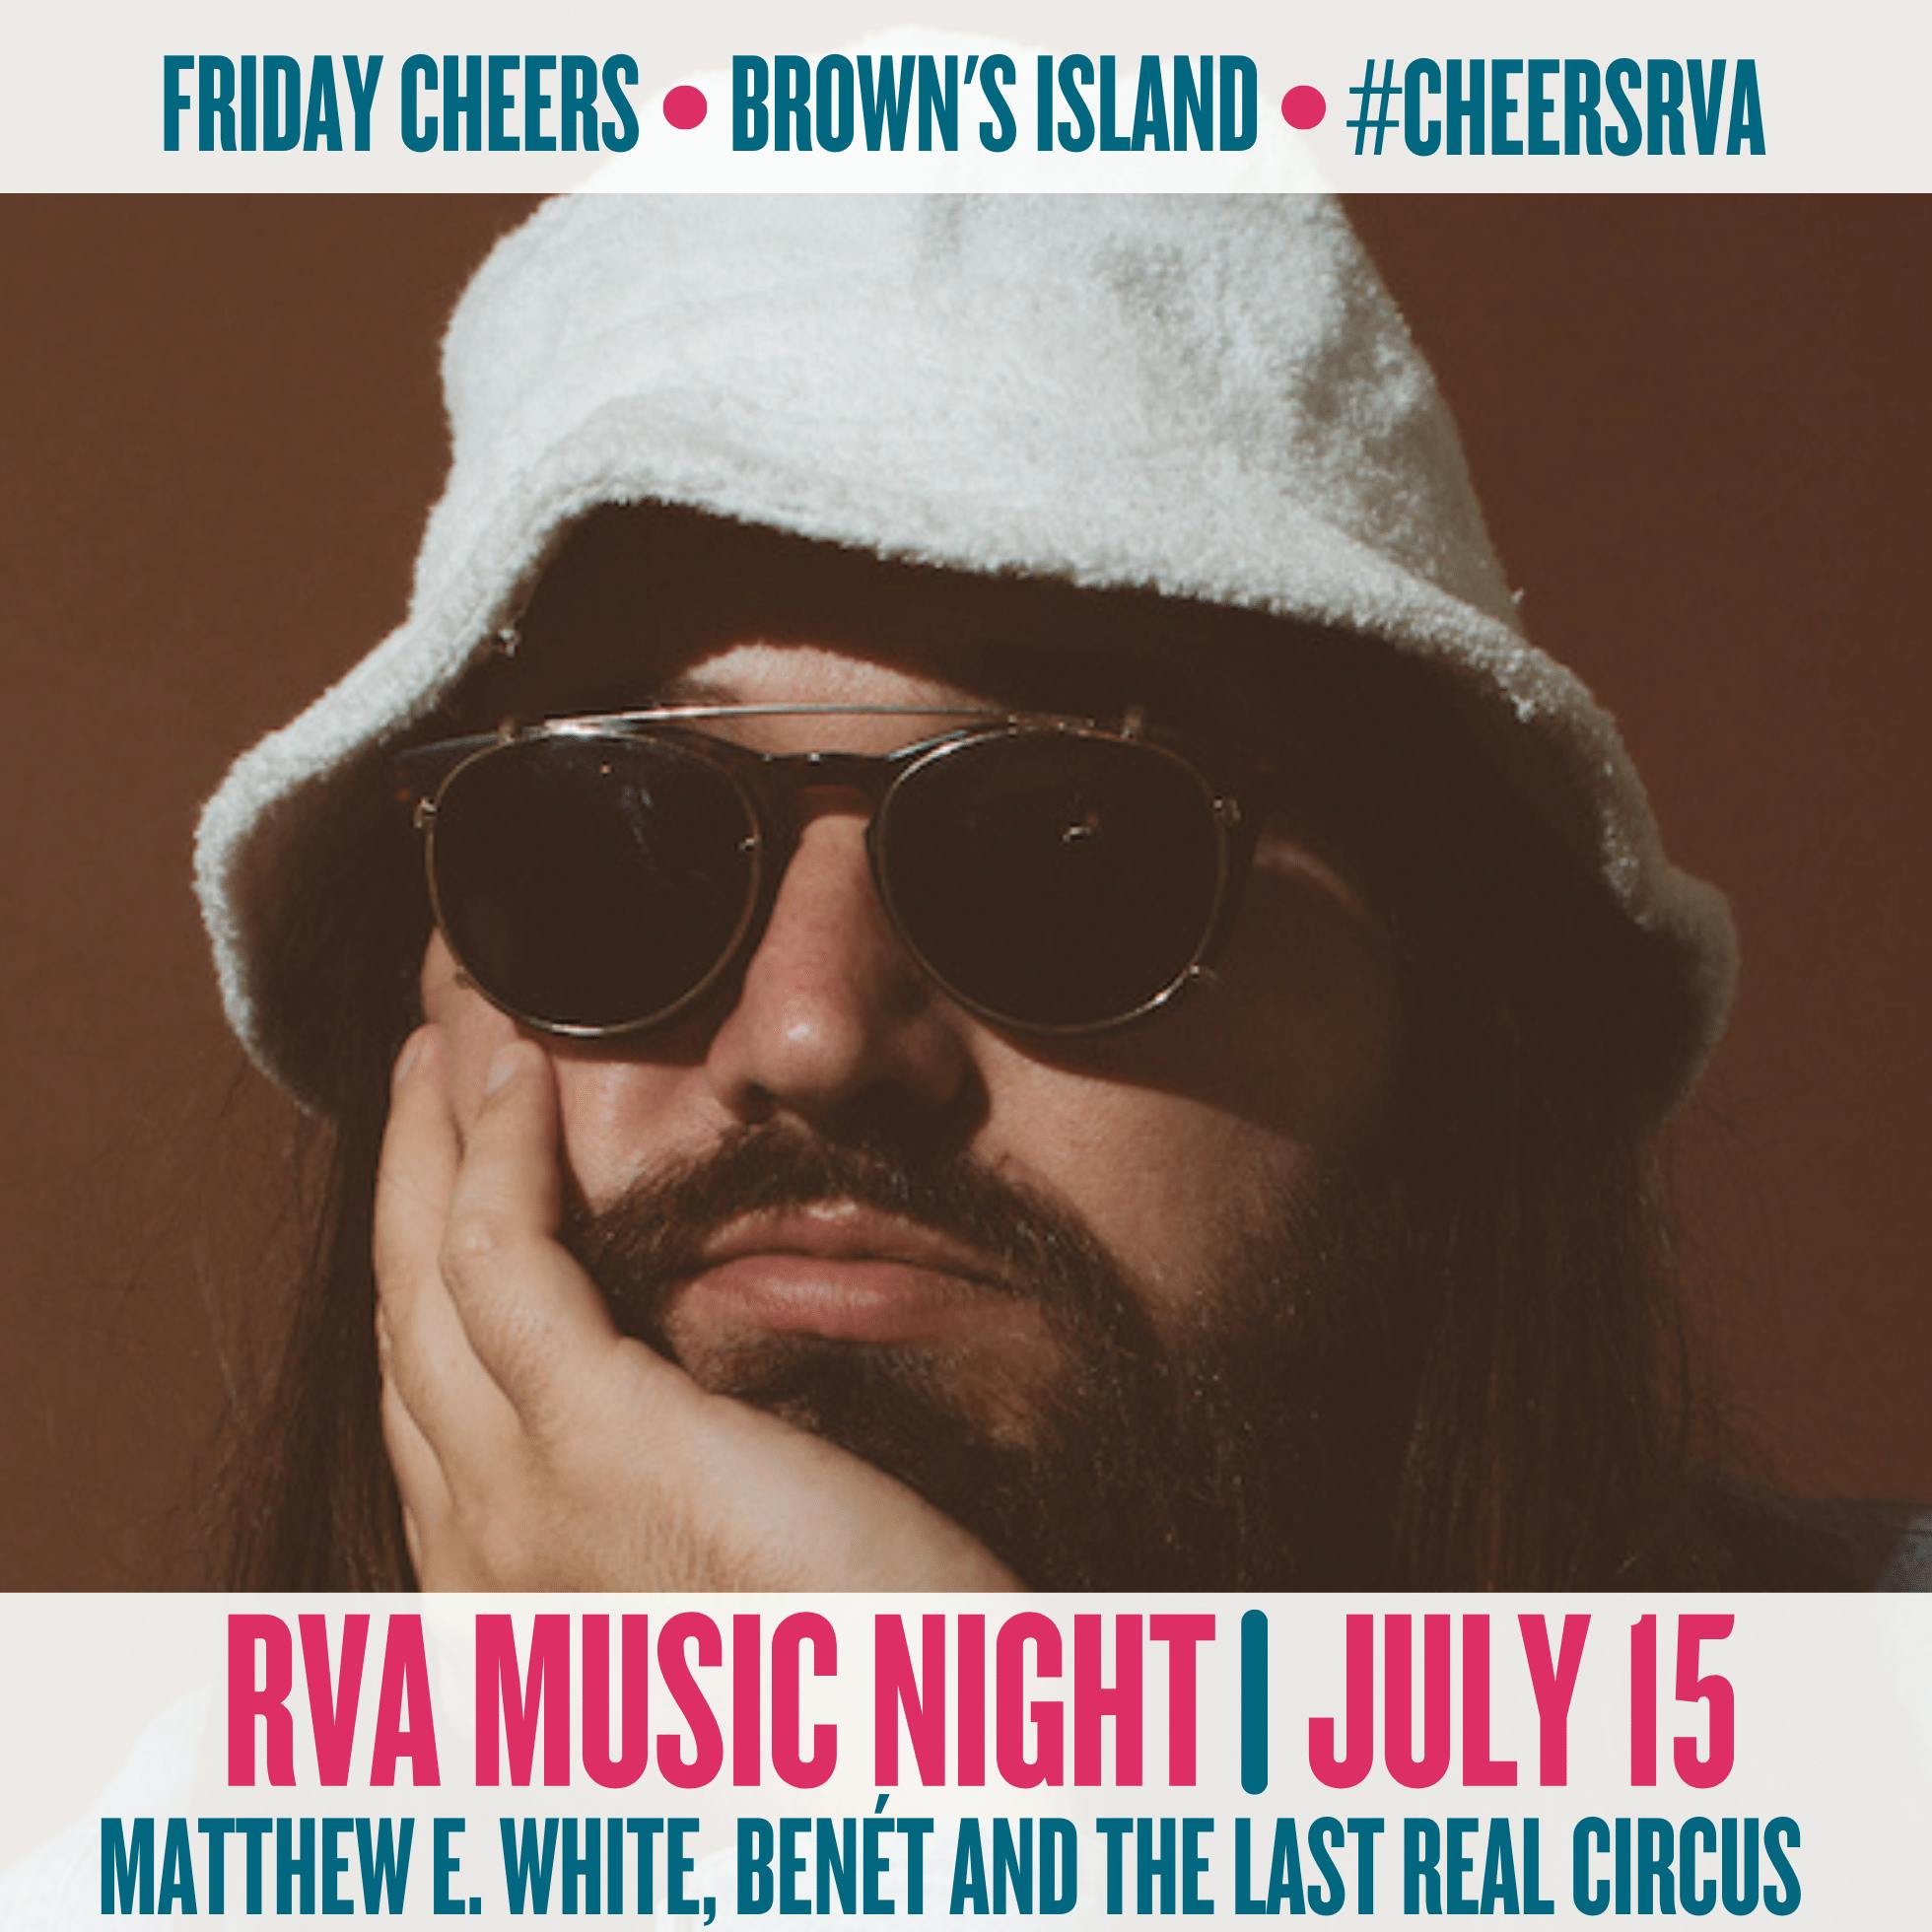 RVA Music Night with Matthew E. White, Benét and The Last Real Circus